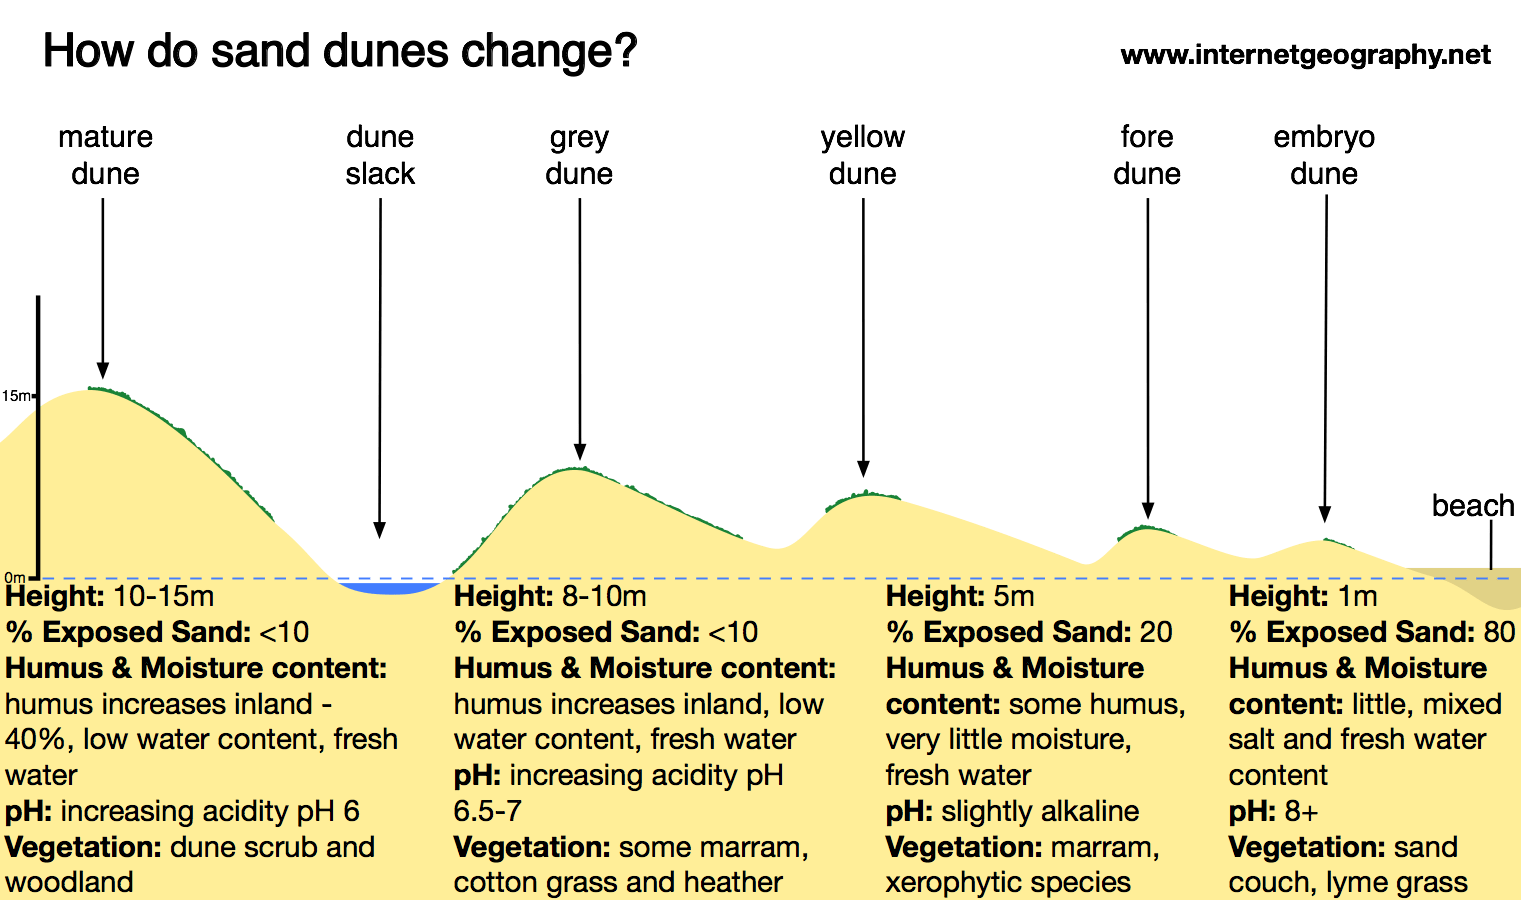 Sand dune, Definition, Formation, & Facts